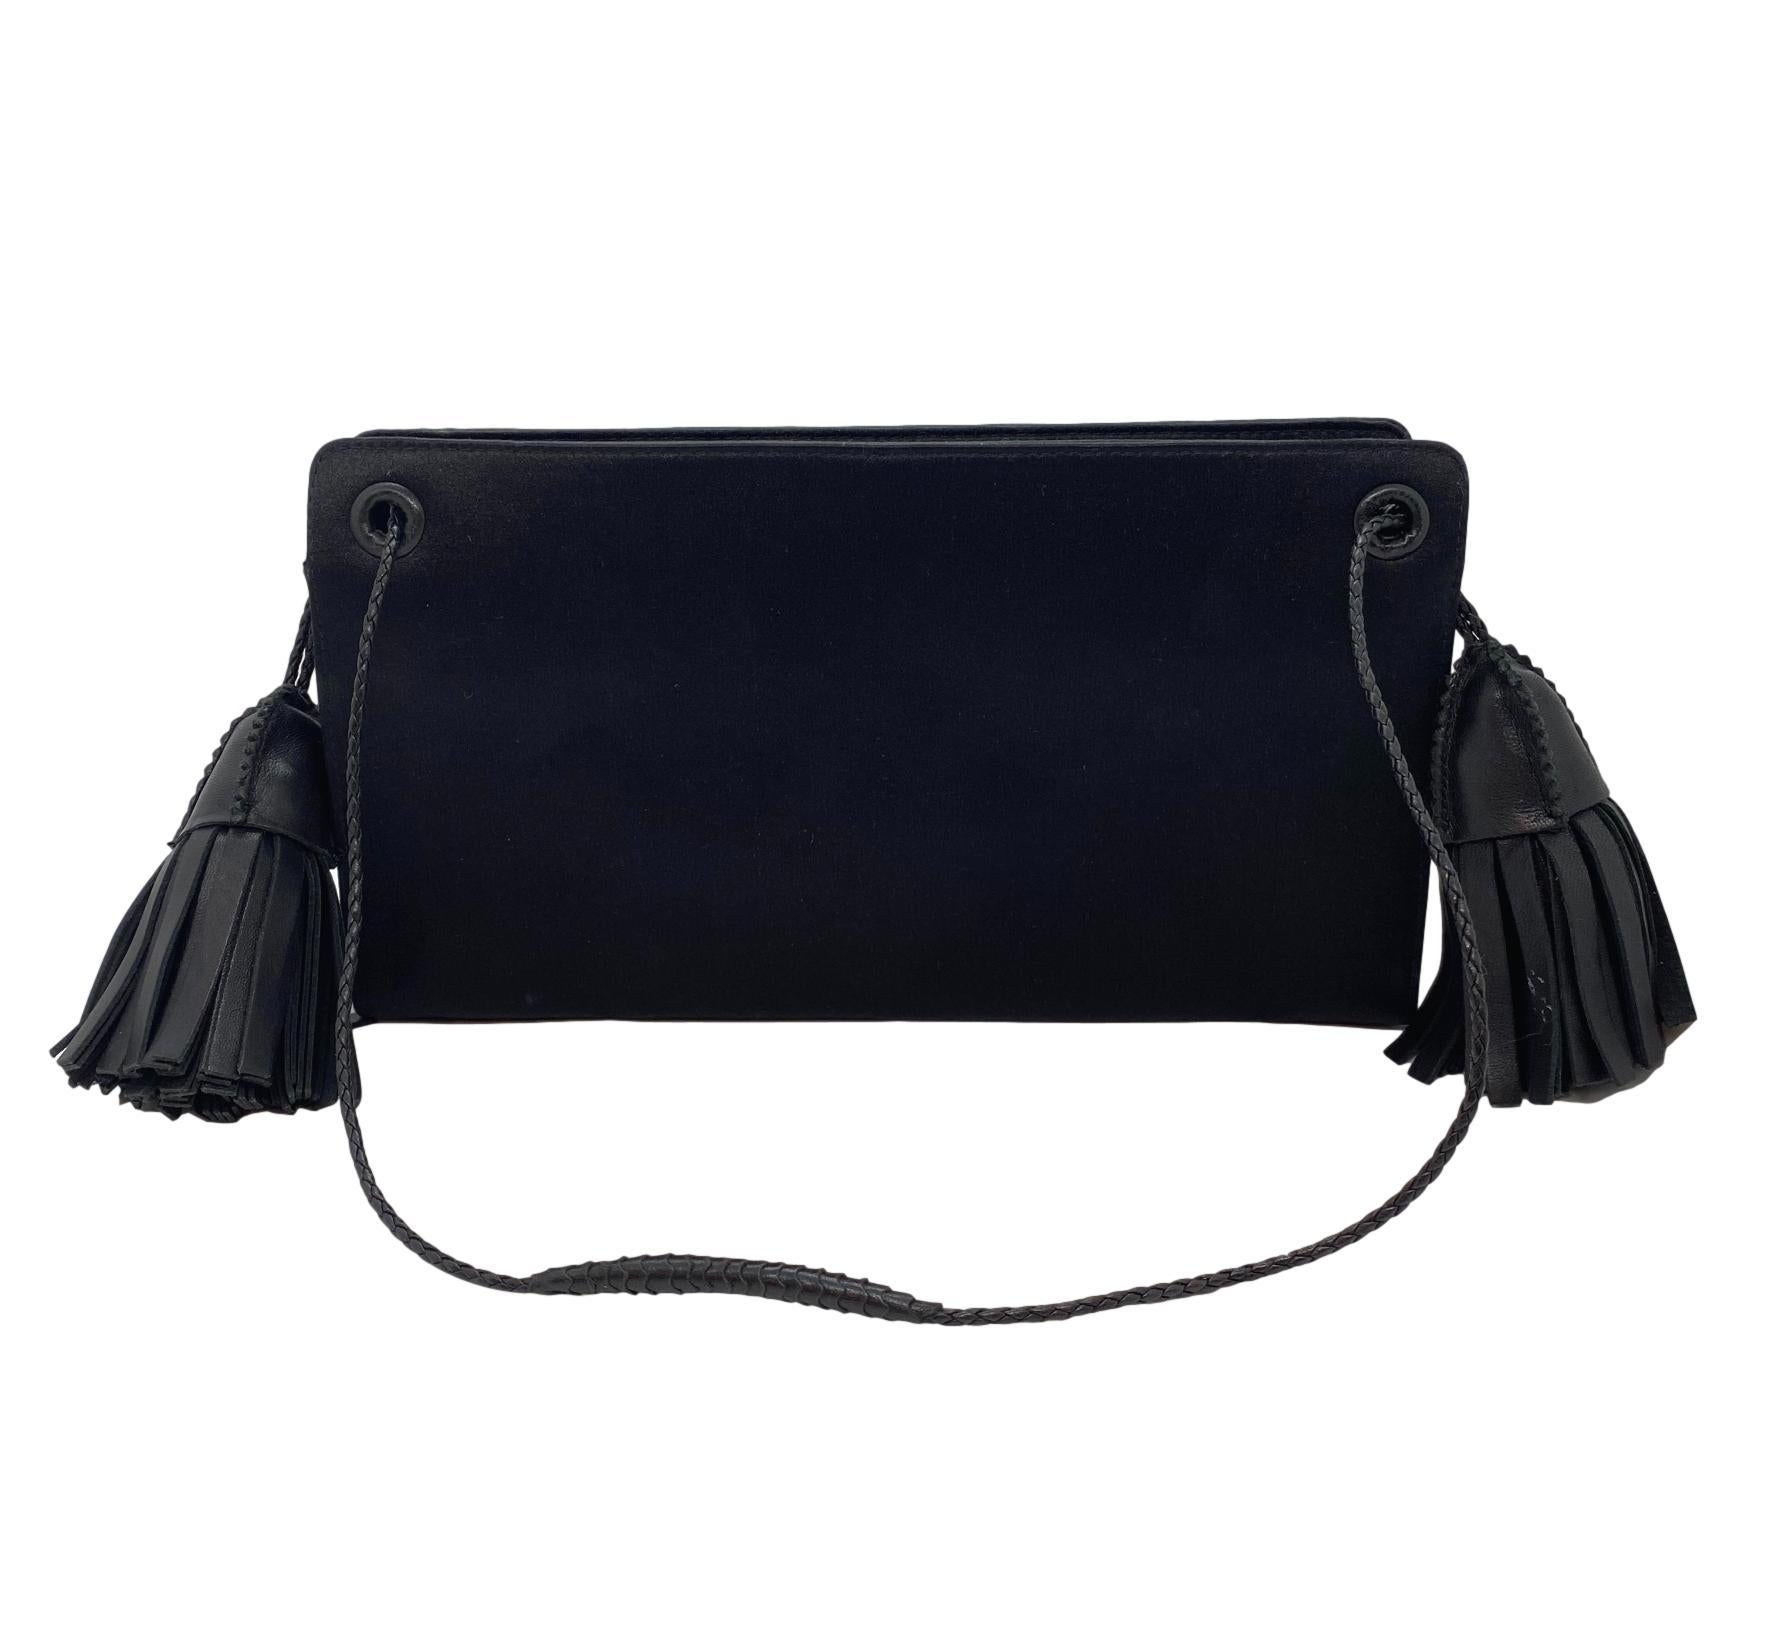 Vintage Bottega Veneta Double Tassel Satin Evening Clutch Shoulder Bag, circa 1995. Established in 1966, Bottega Veneta quickly became world re-known for it's close attention to detail and intricate weaving of leather in their handmade goods. Under